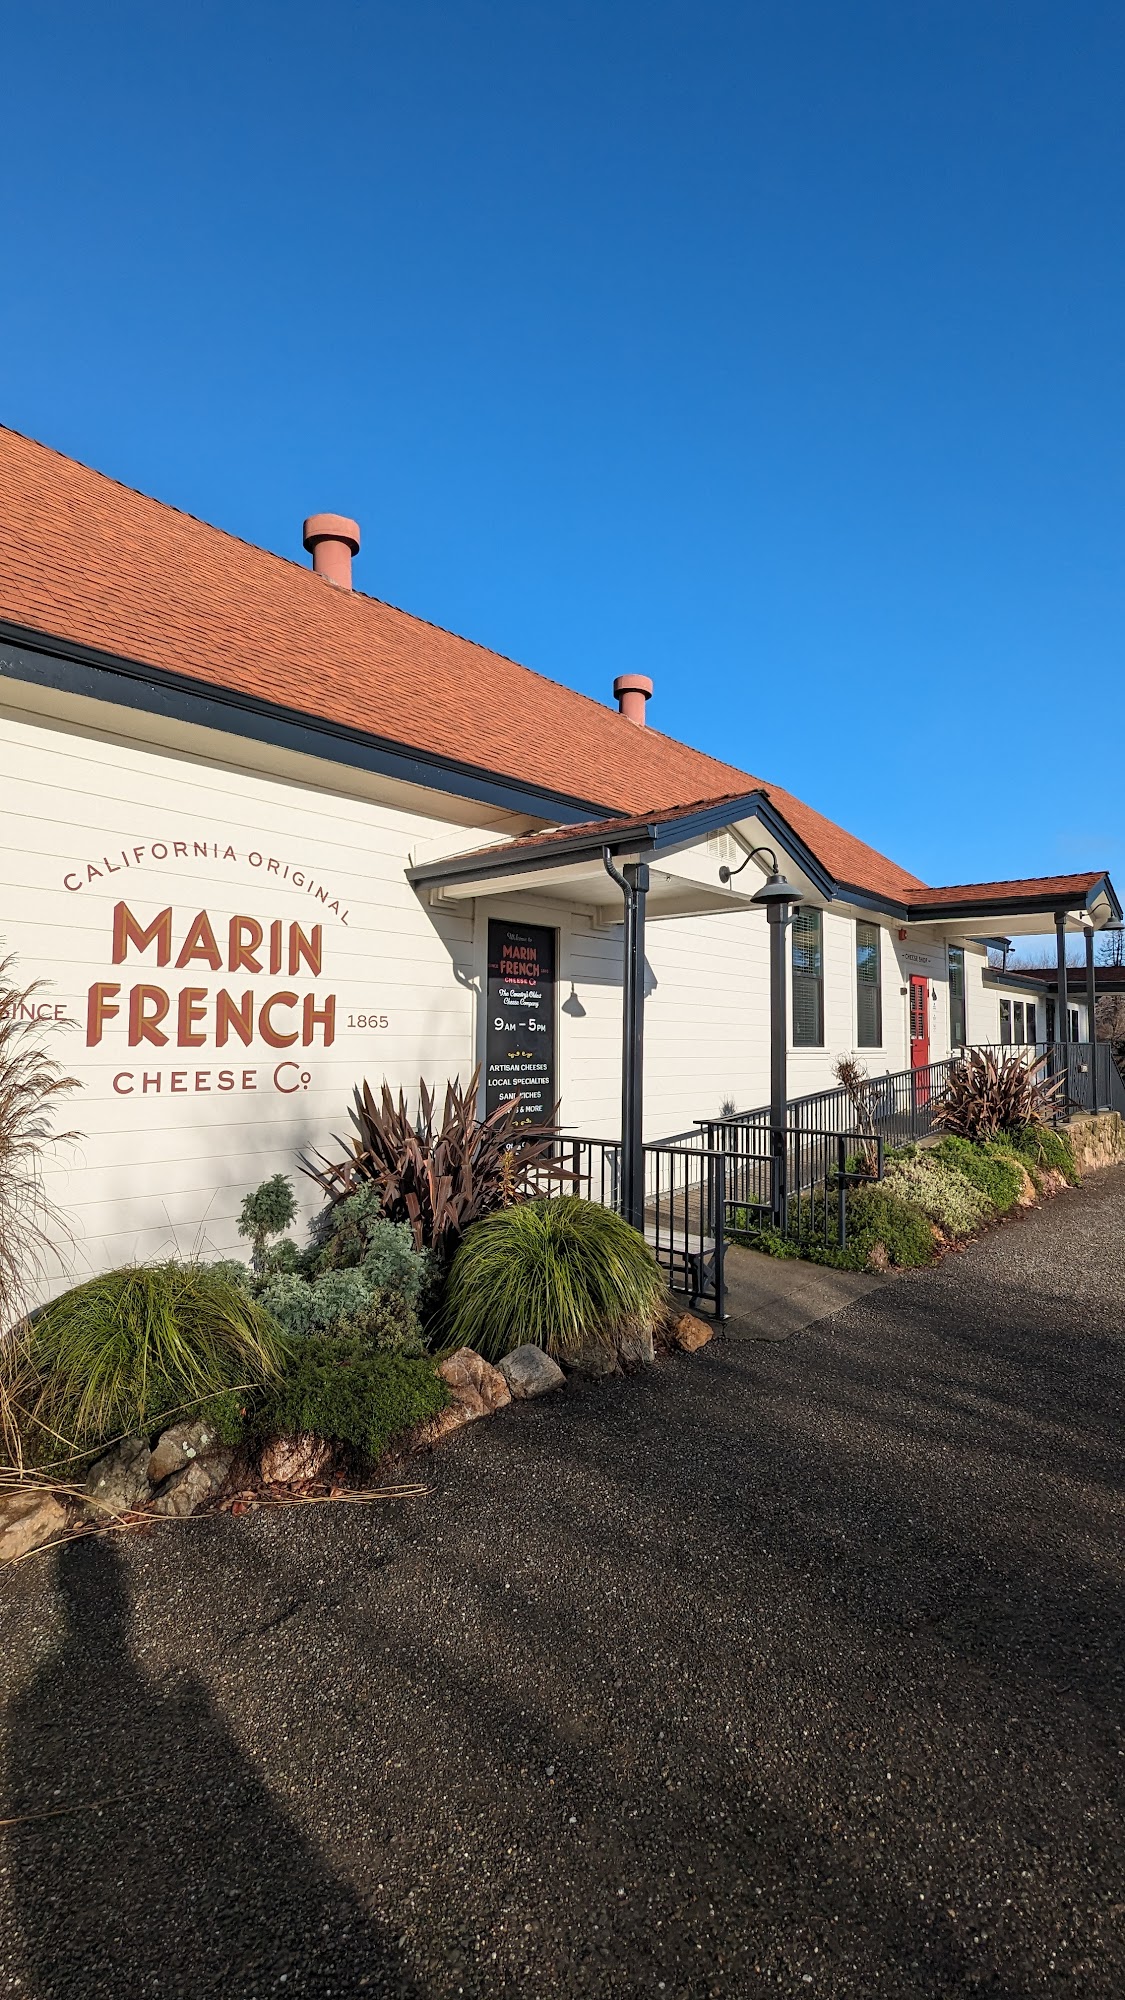 Marin French Cheese Co.